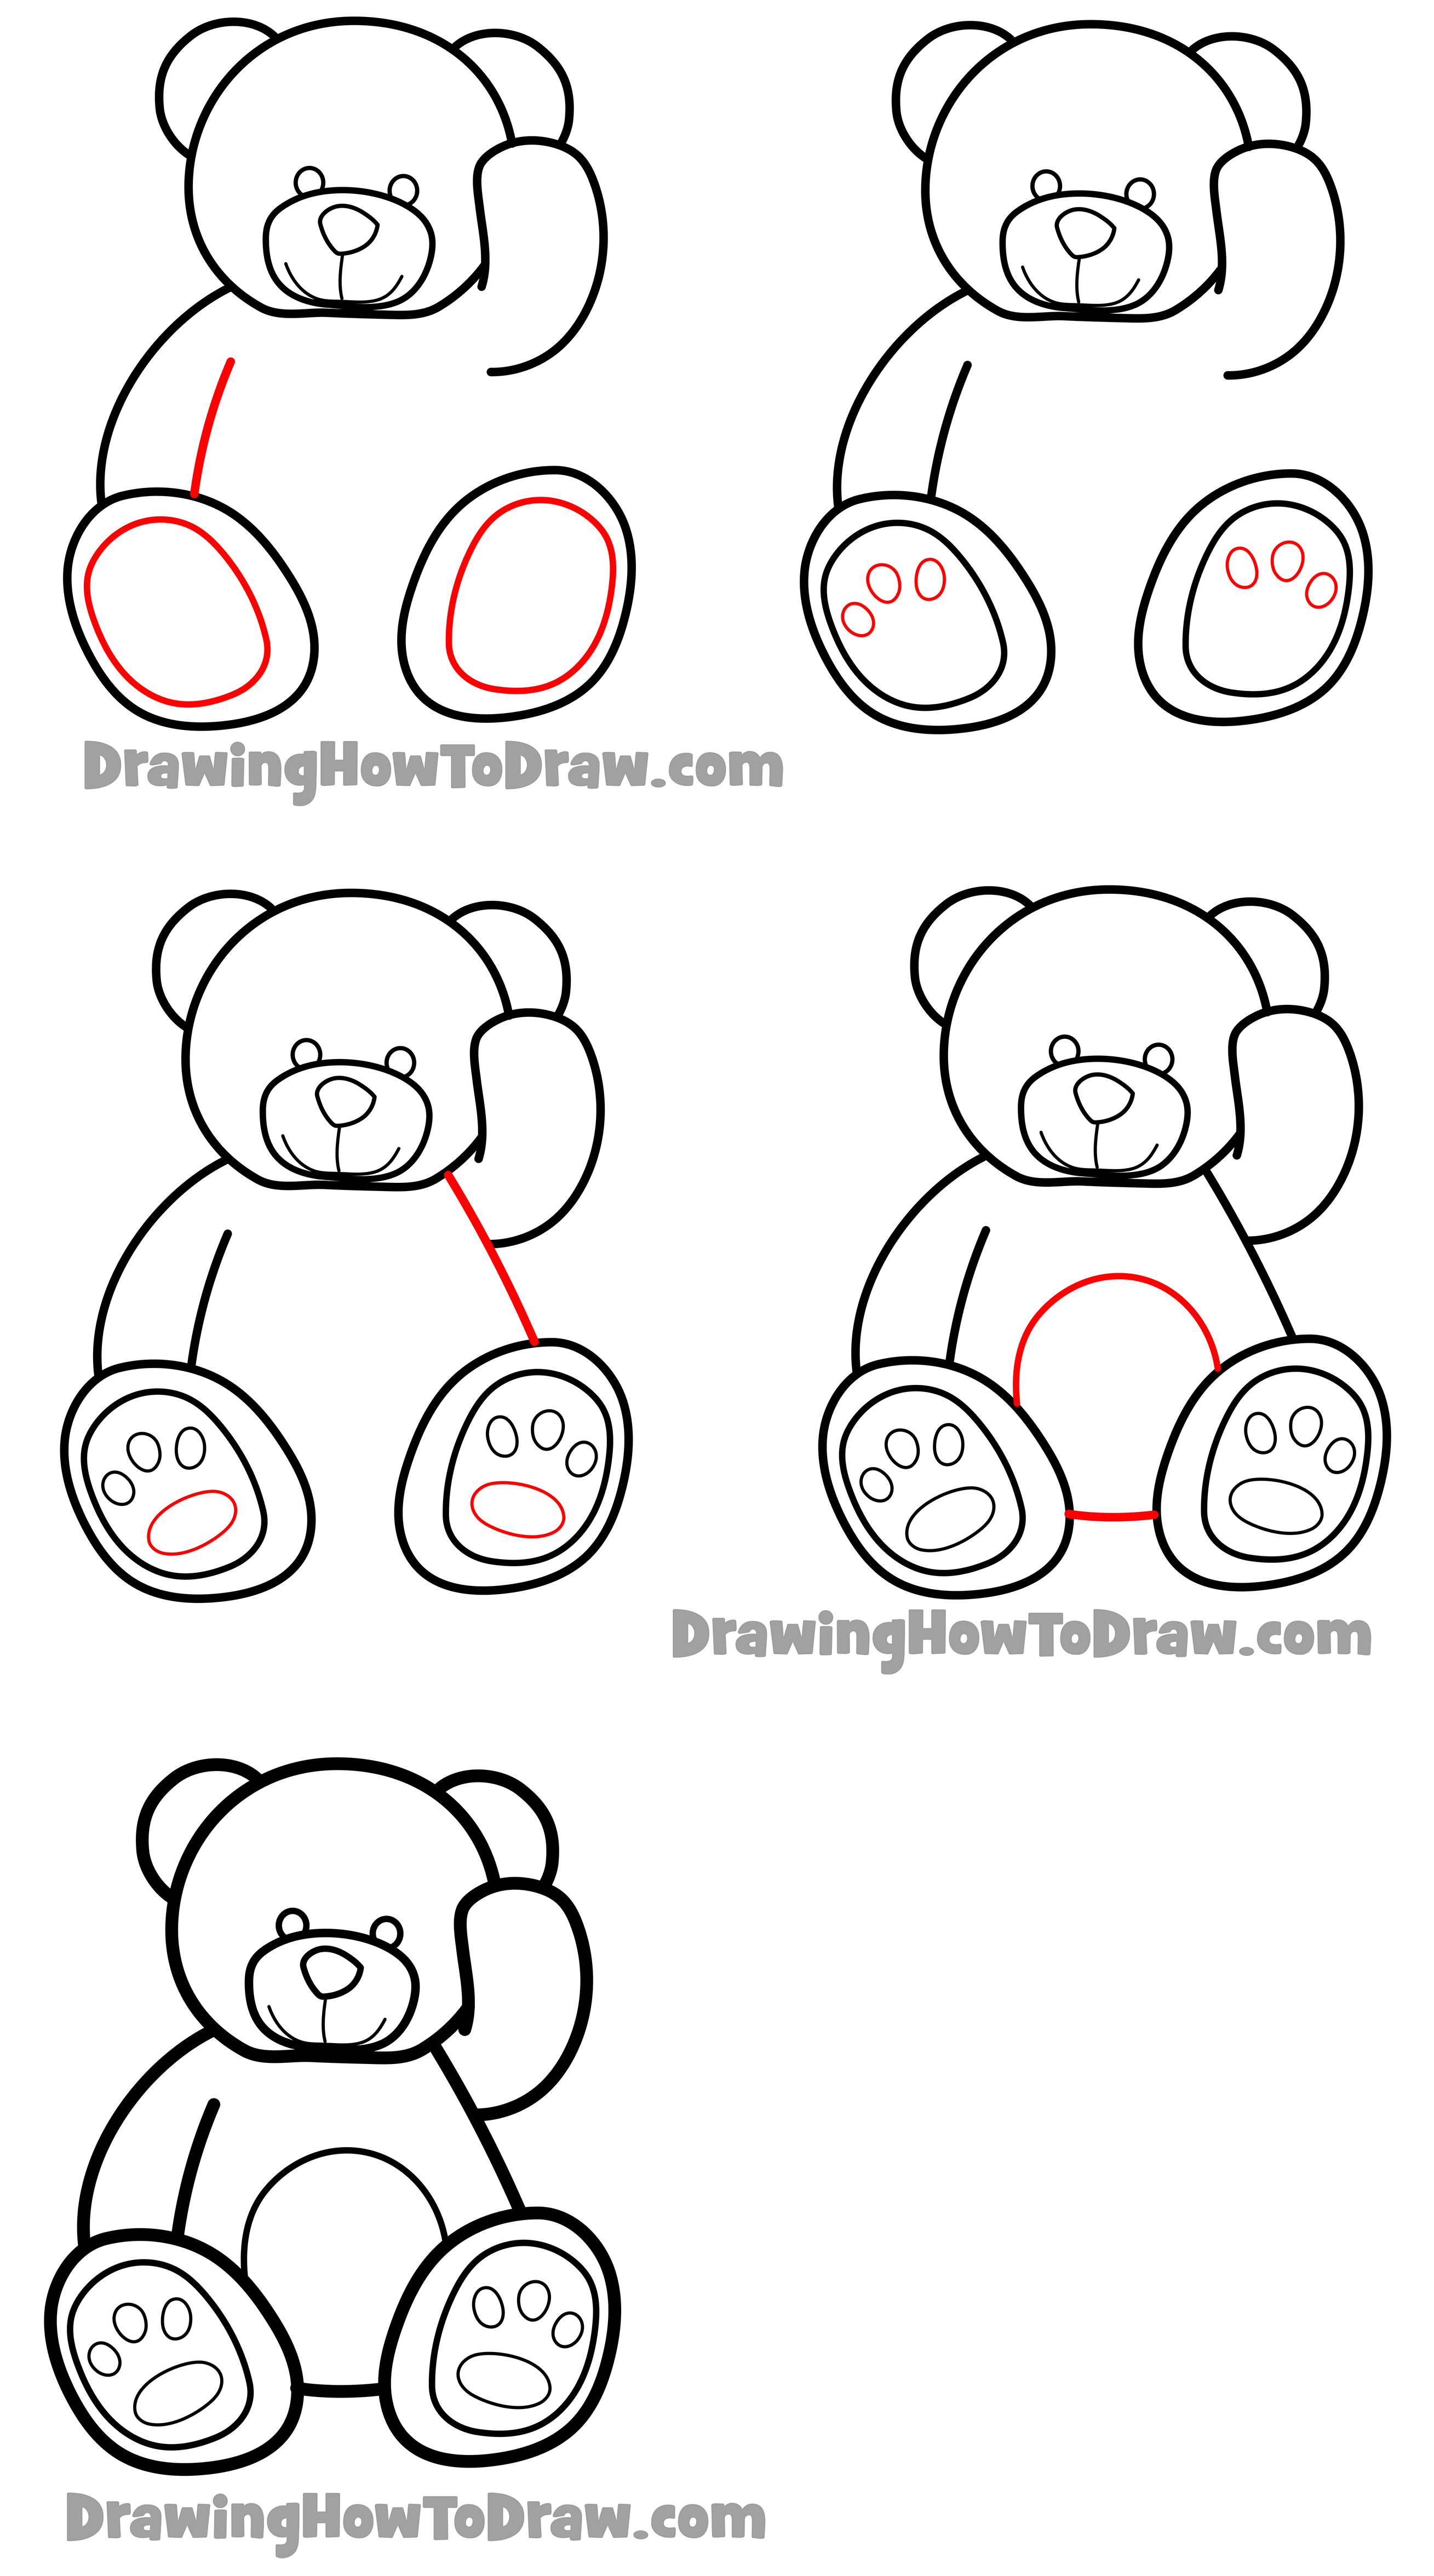 Learn How to Draw a Cartoon Teddy Bear Easy Step-by-Step Drawing Tutorial for Kids